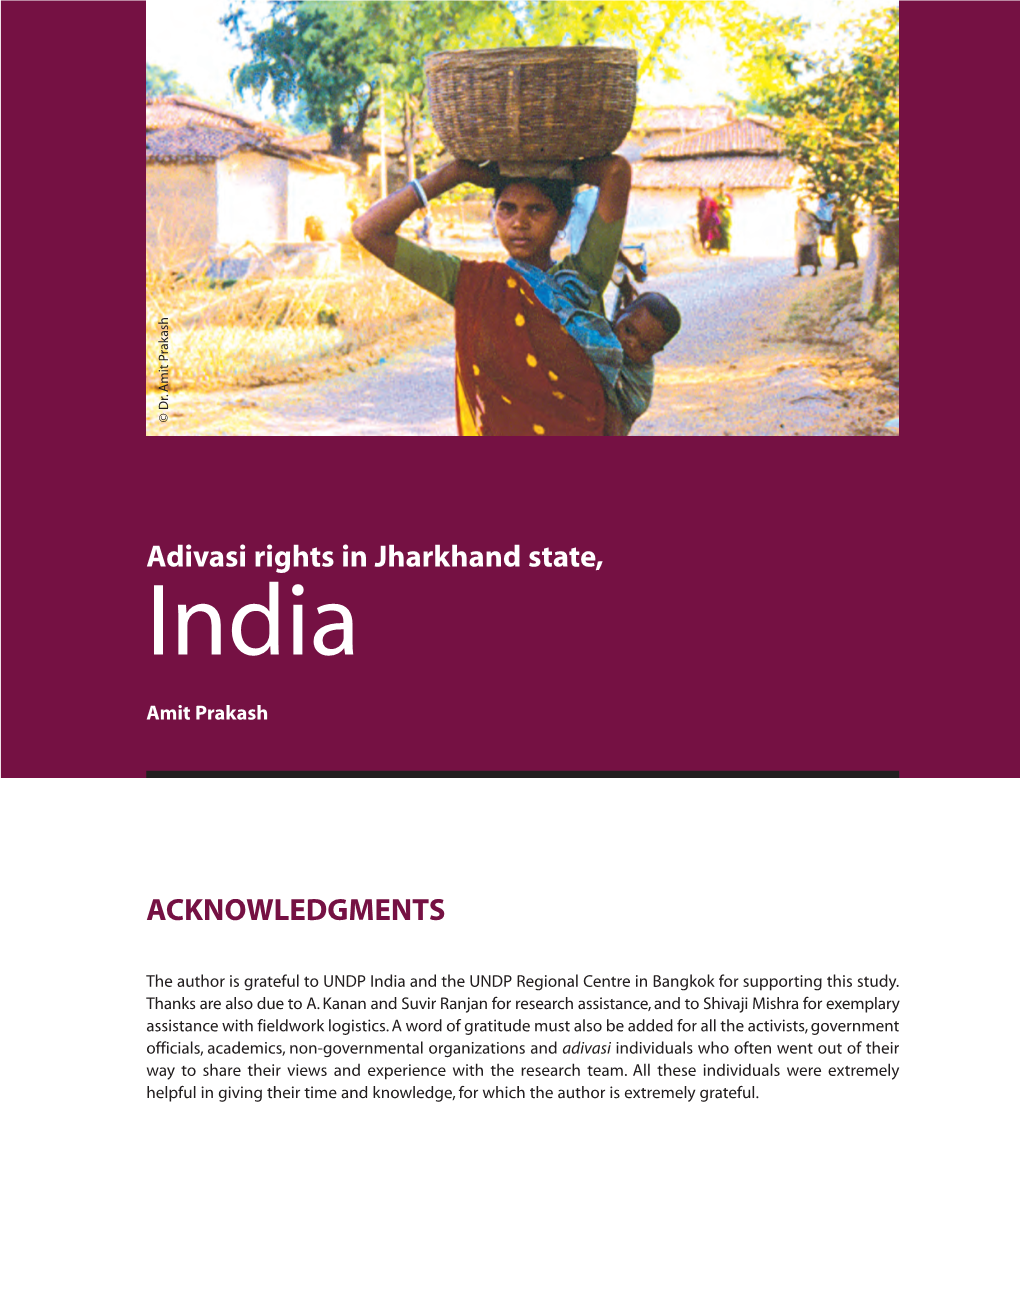 Adivasi Rights in Jharkhand State, ACKNOWLEDGMENTS